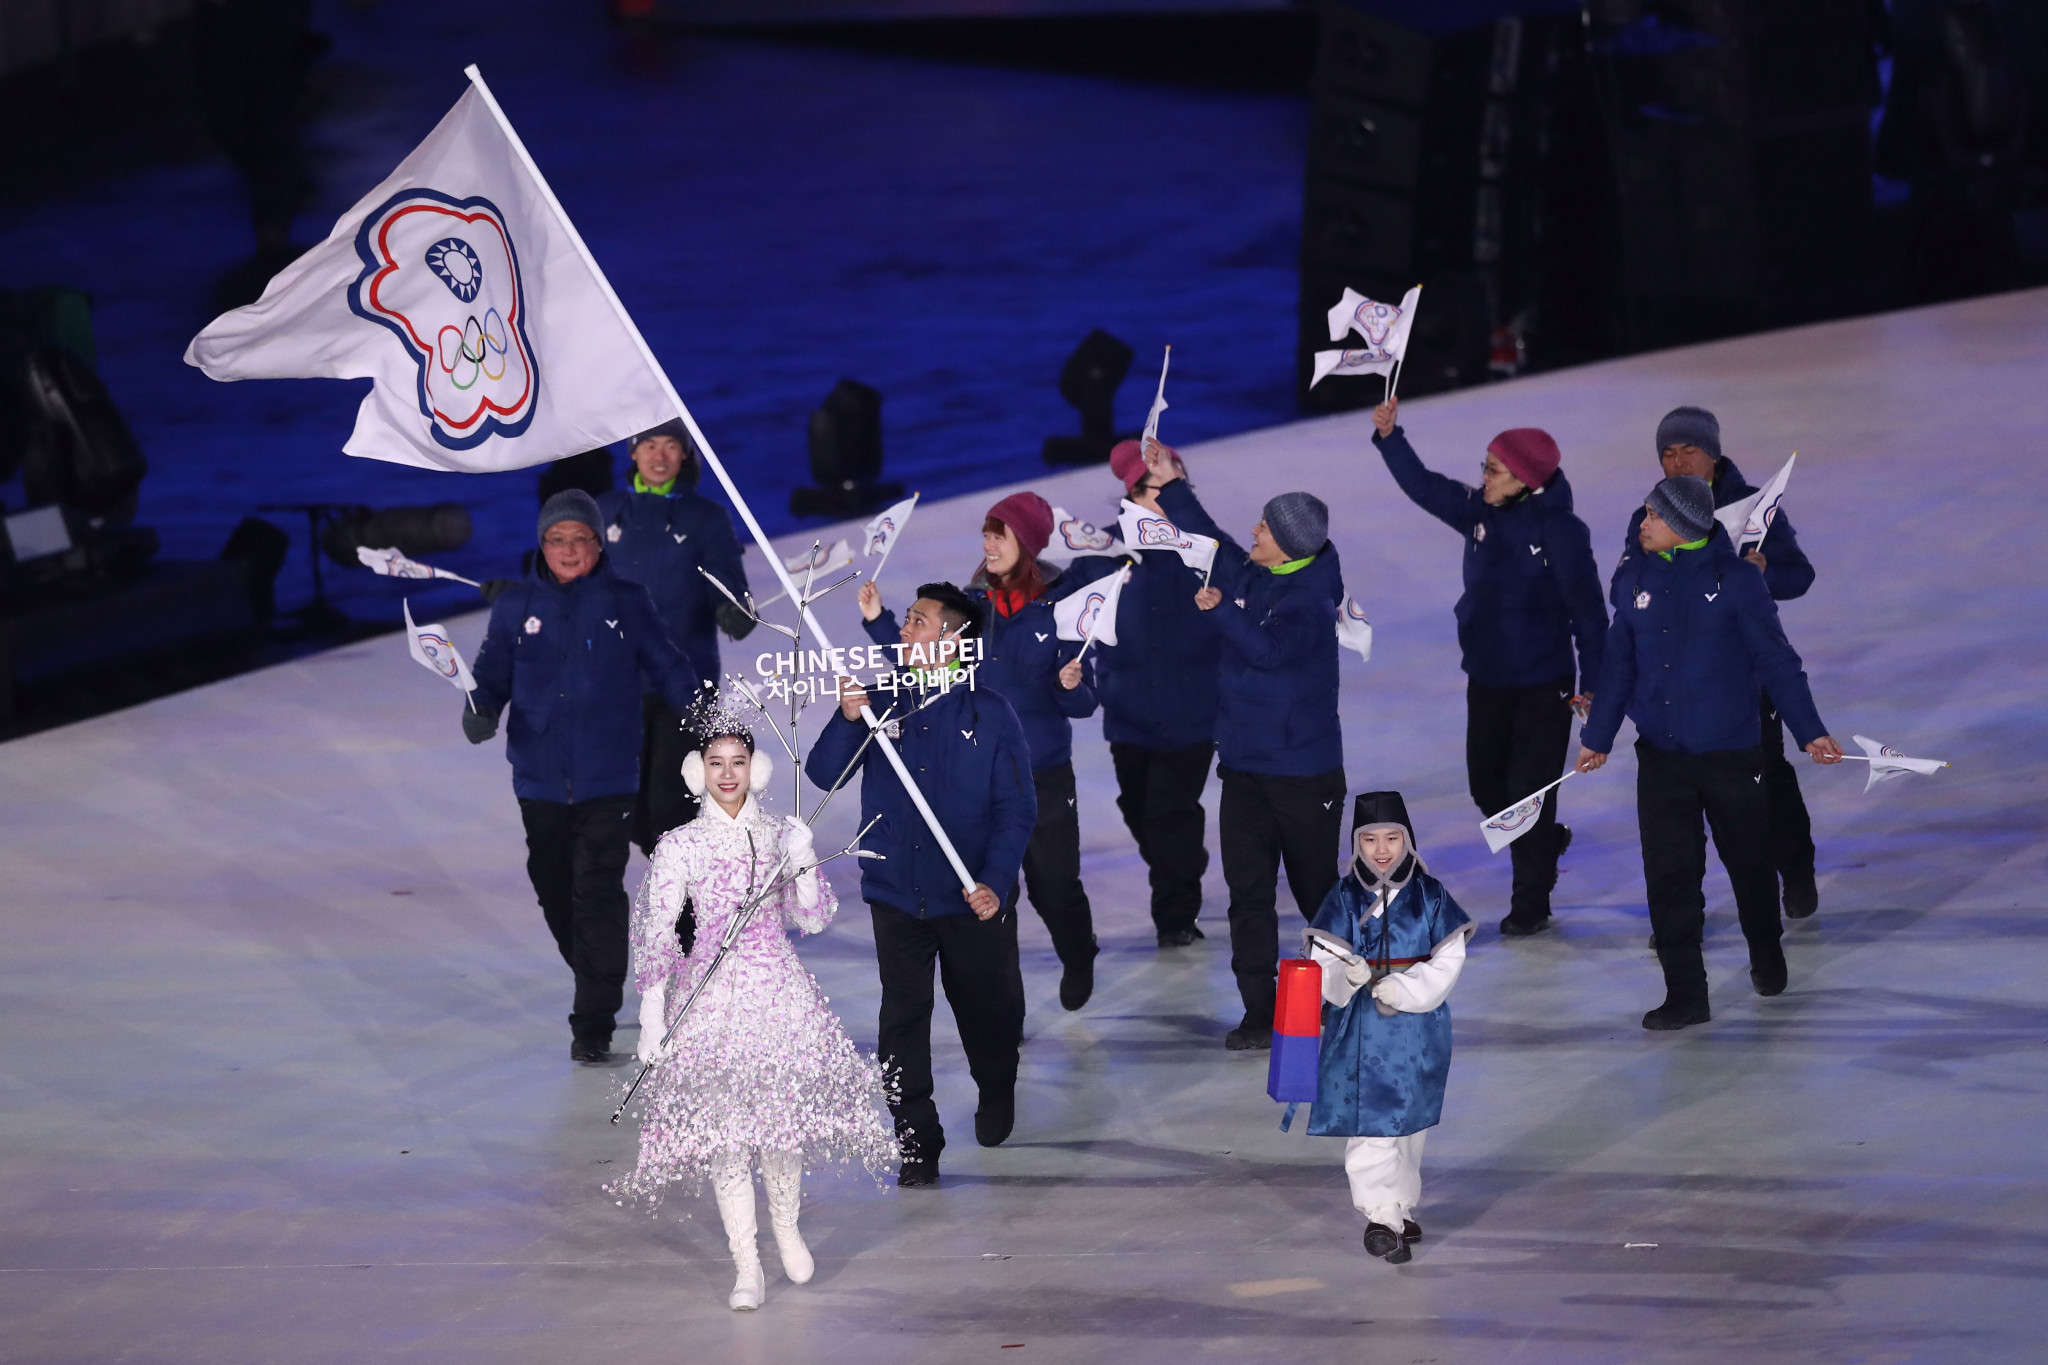 Taiwanese ordered by IOC to appear at Beijing 2022 Opening Ceremony